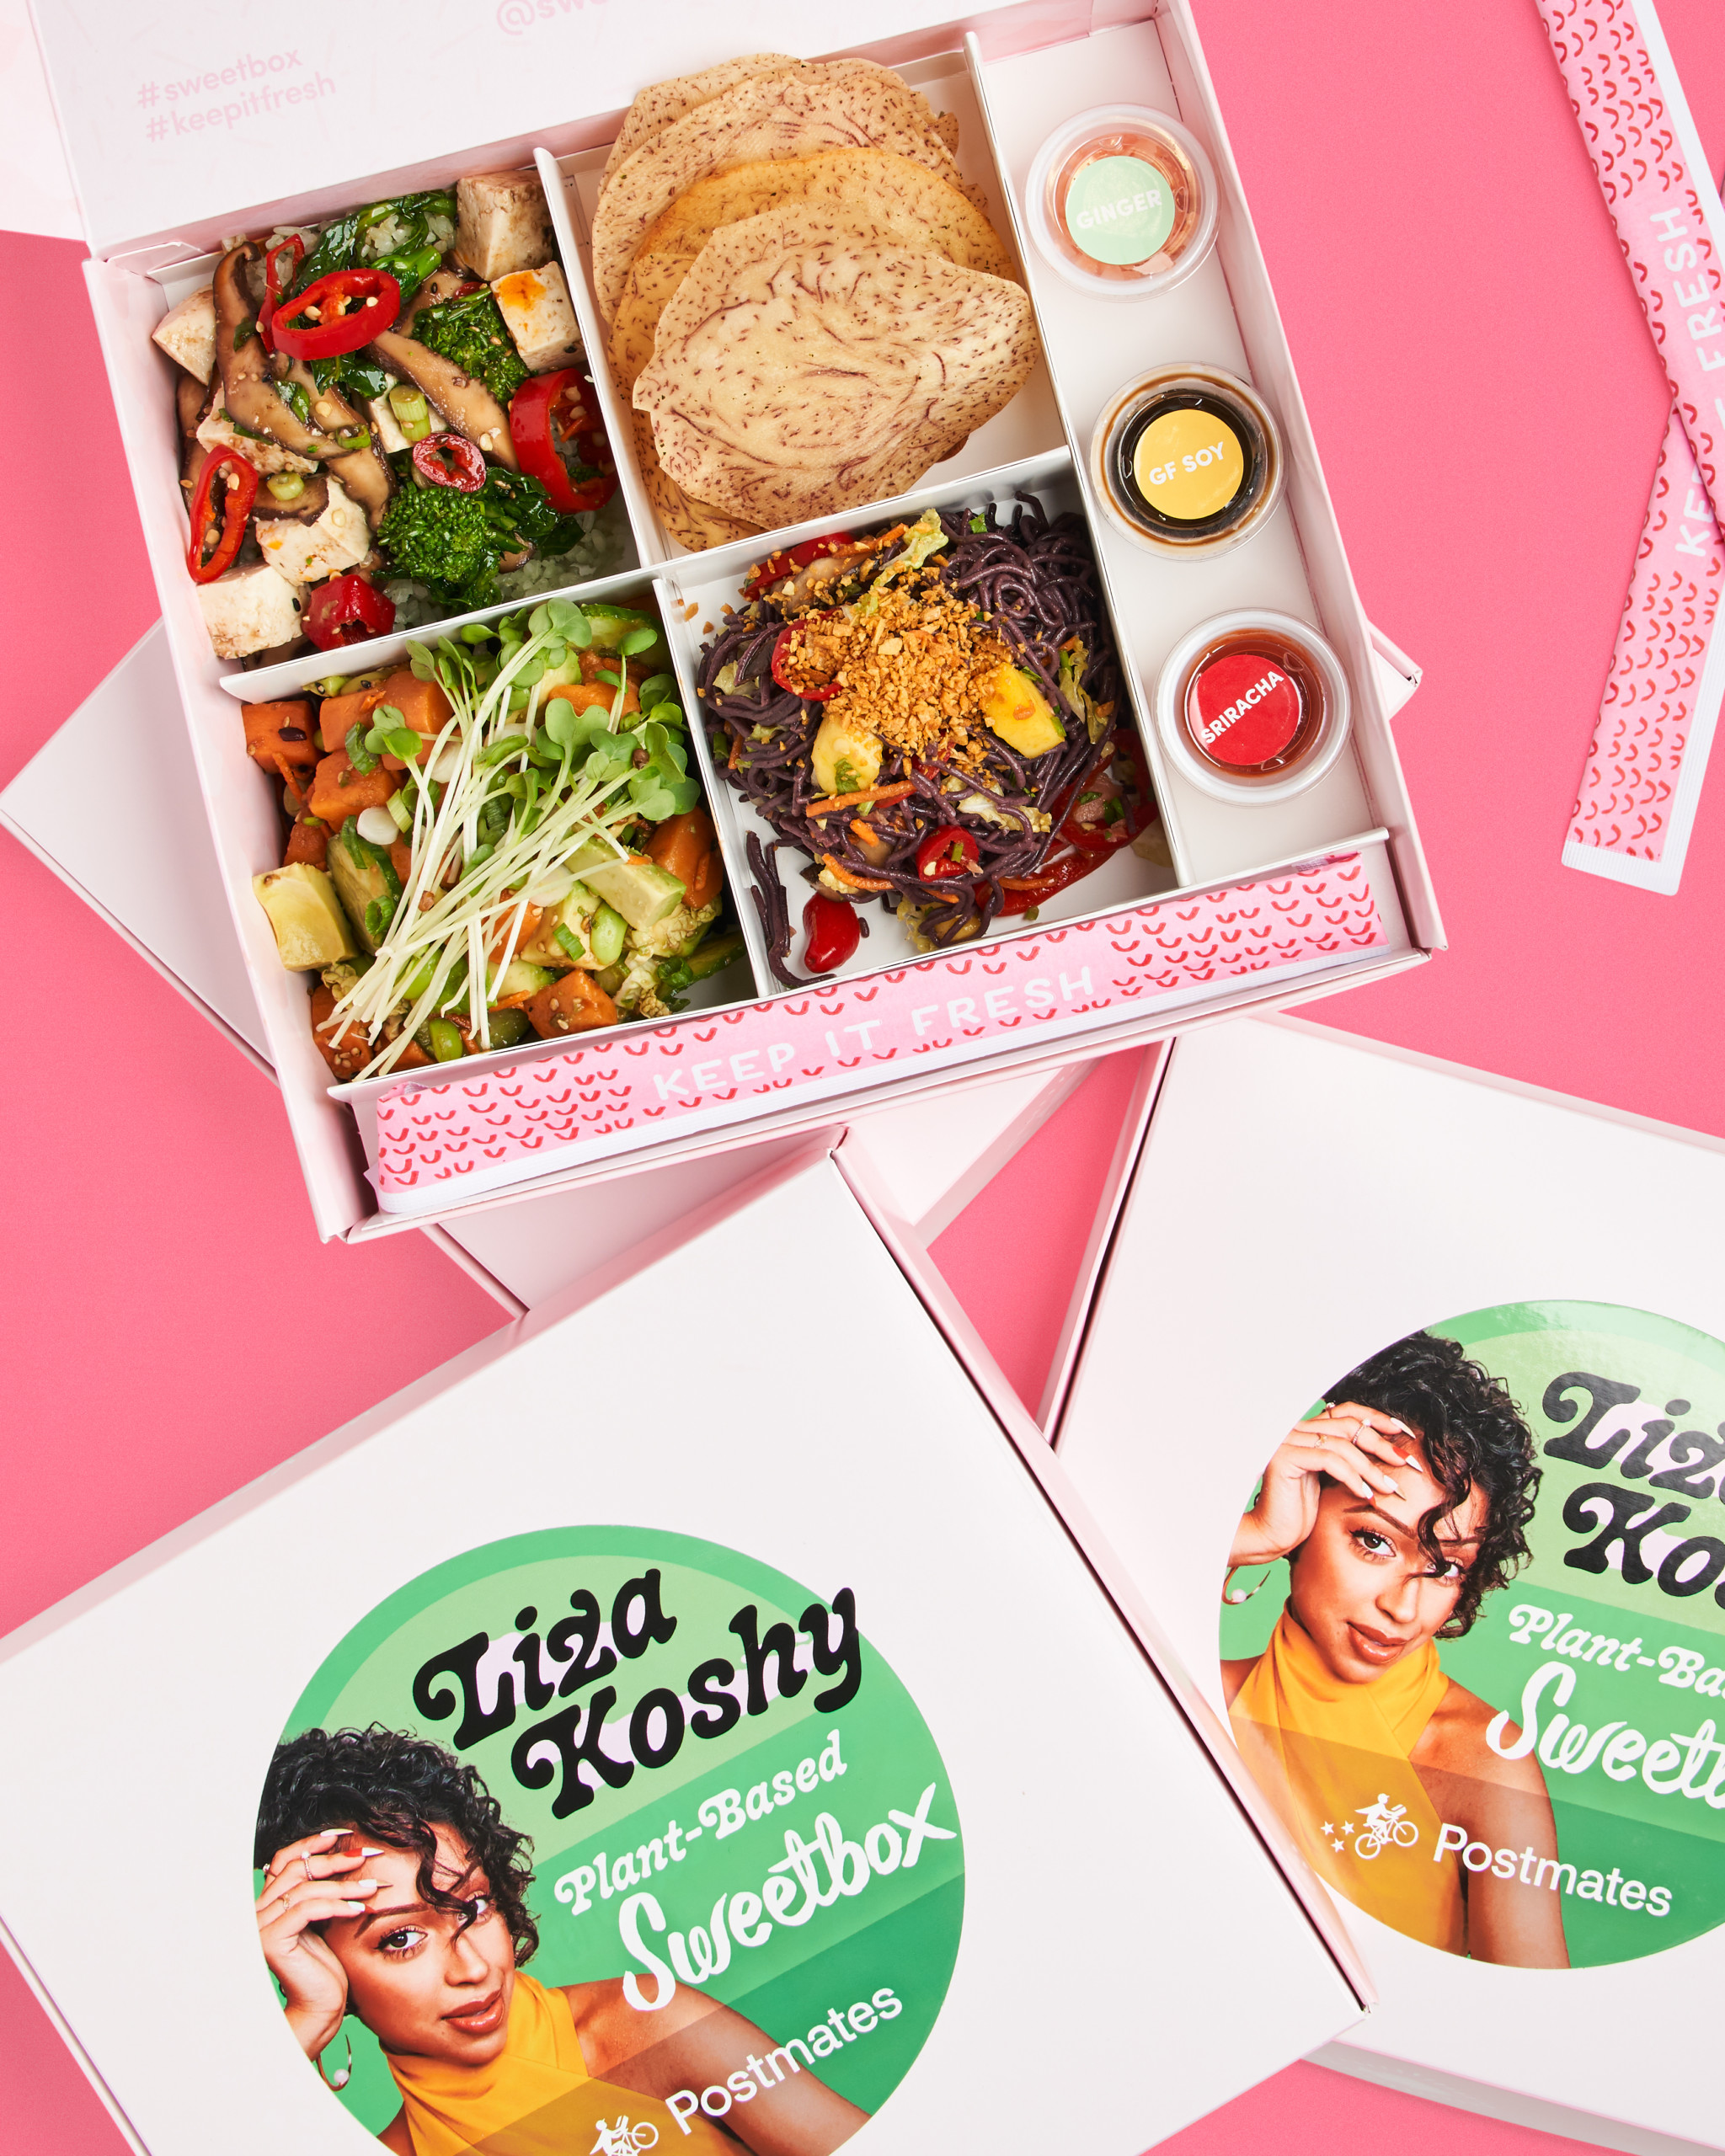 Liza Koshy Partners with Sweetfin on Plant-Based Sweetbox